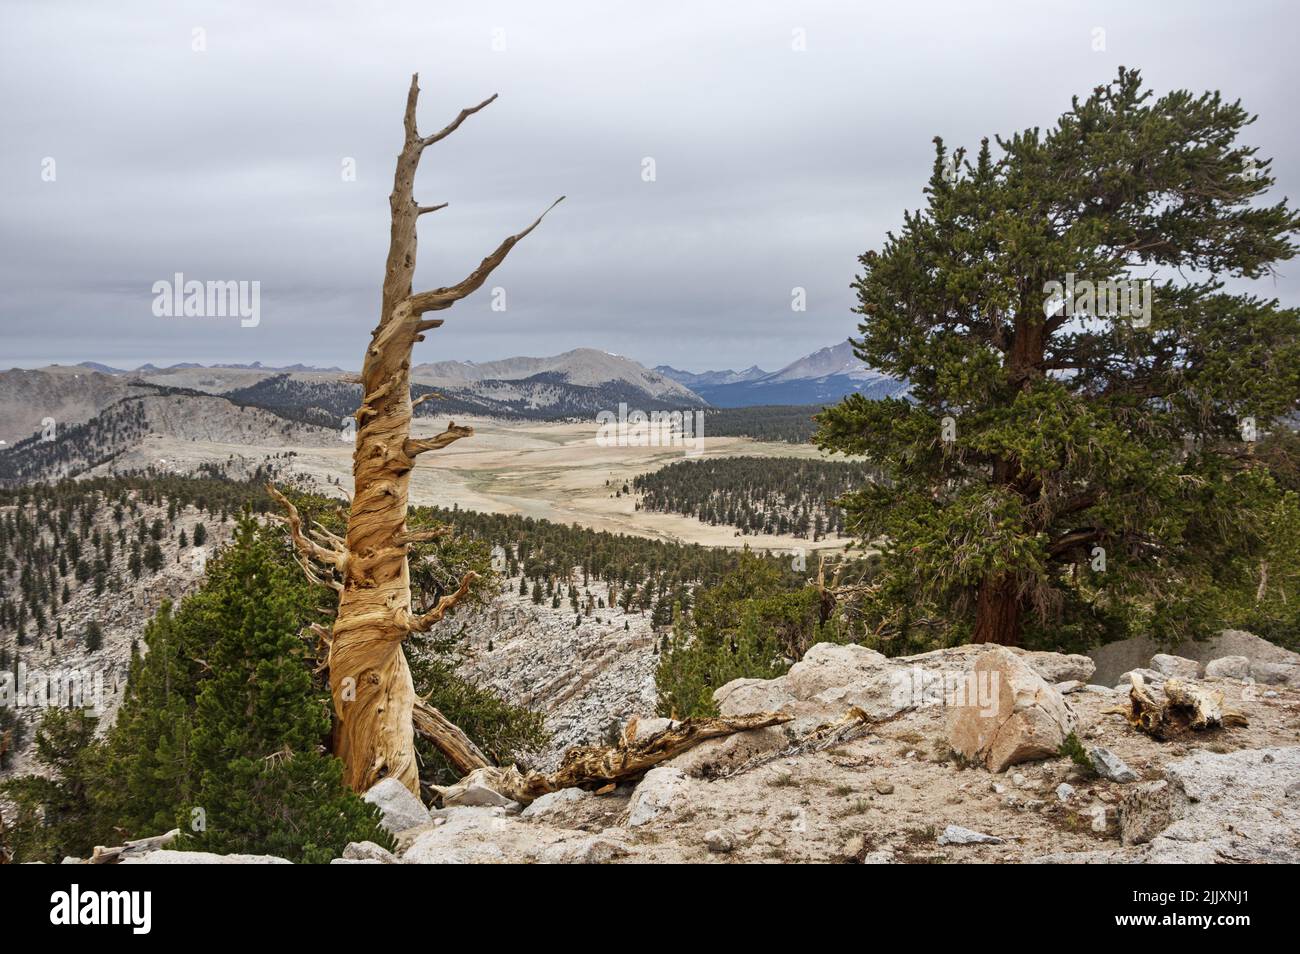 dead and living pine trees near the Sequoia National Park boundary overlooking Siberian Outpost and the Boreal Plateau in the Sierra Nevada Mountains Stock Photo